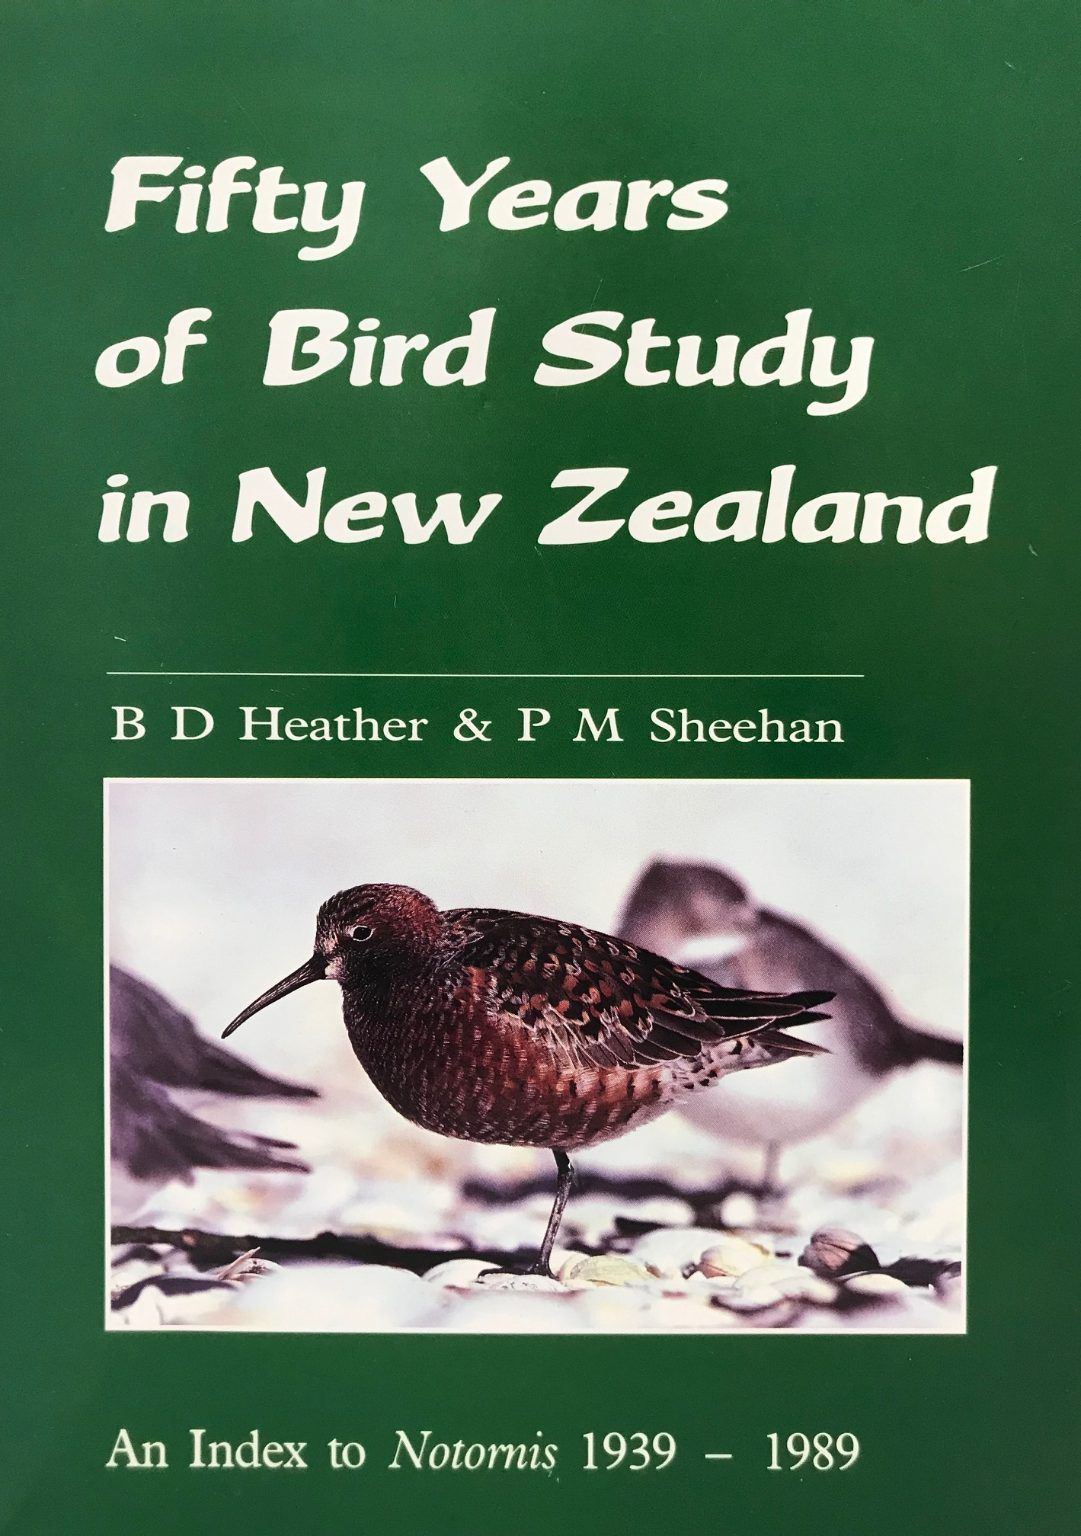 FIFTY YEARS OF BIRD STUDY IN NEW ZEALAND: An Index To Notornis 1939-1989